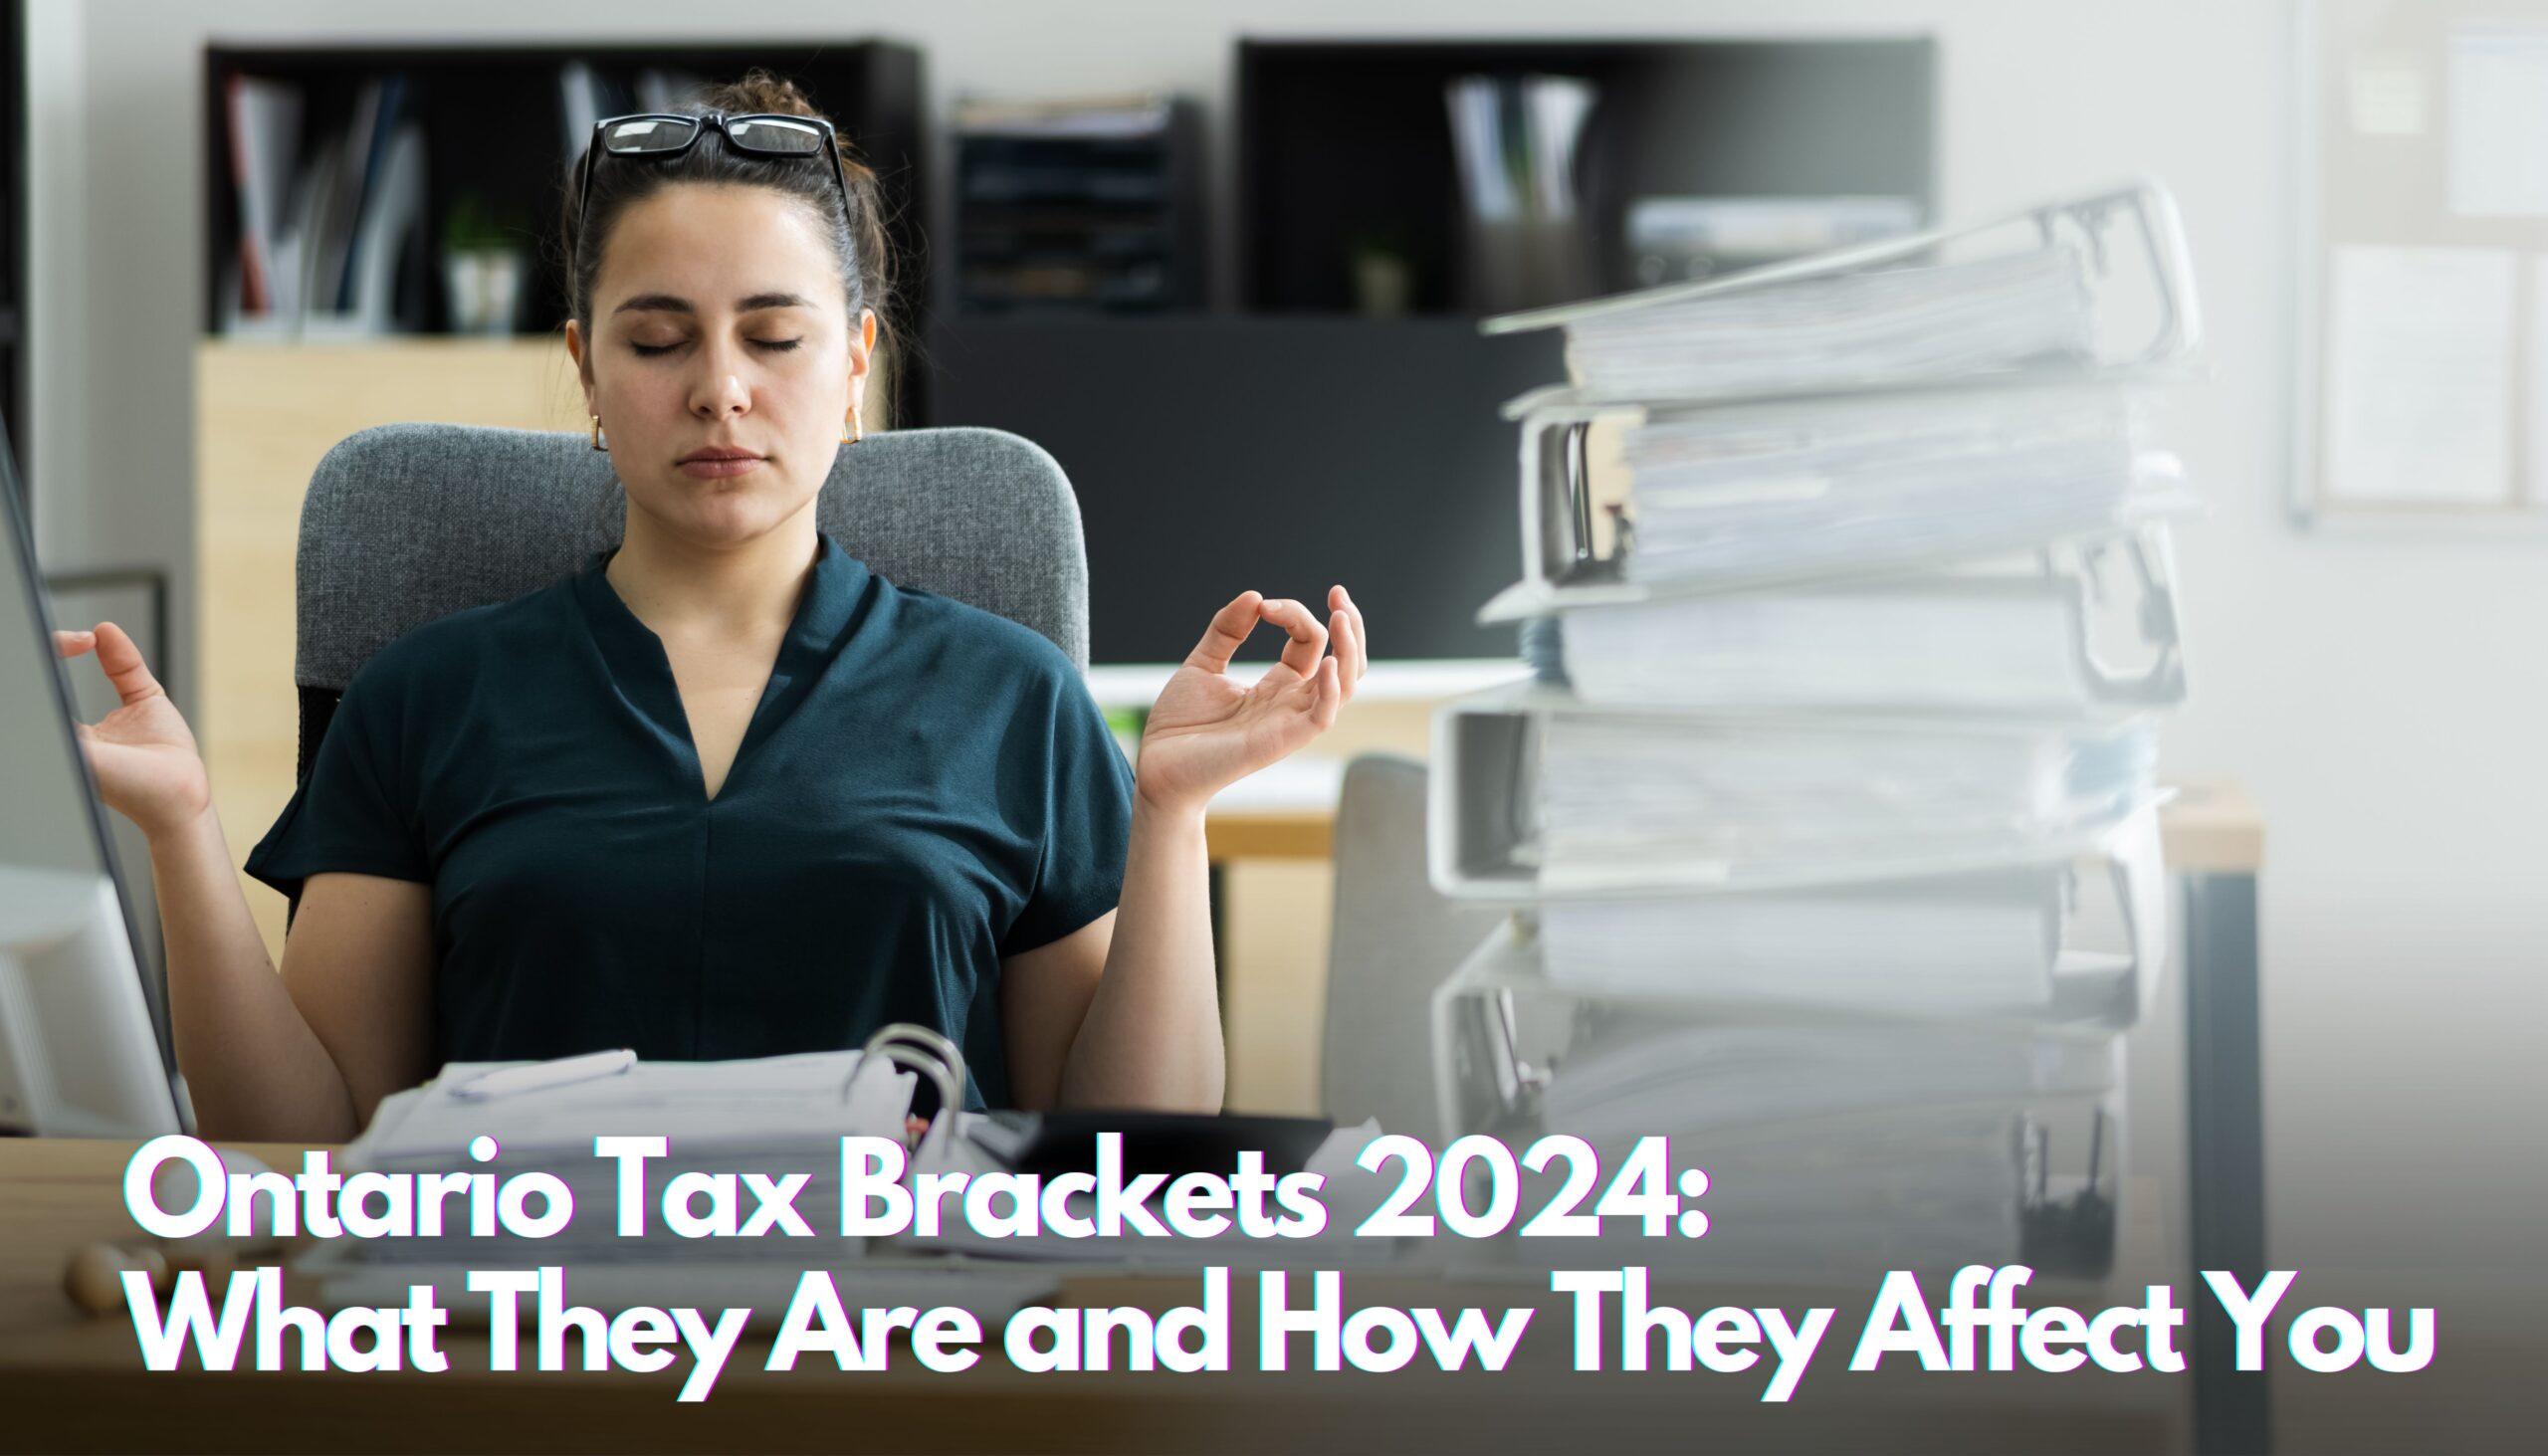 Ontario Tax Brackets 2024: A guide to understanding your tax rates and optimizing your finances.